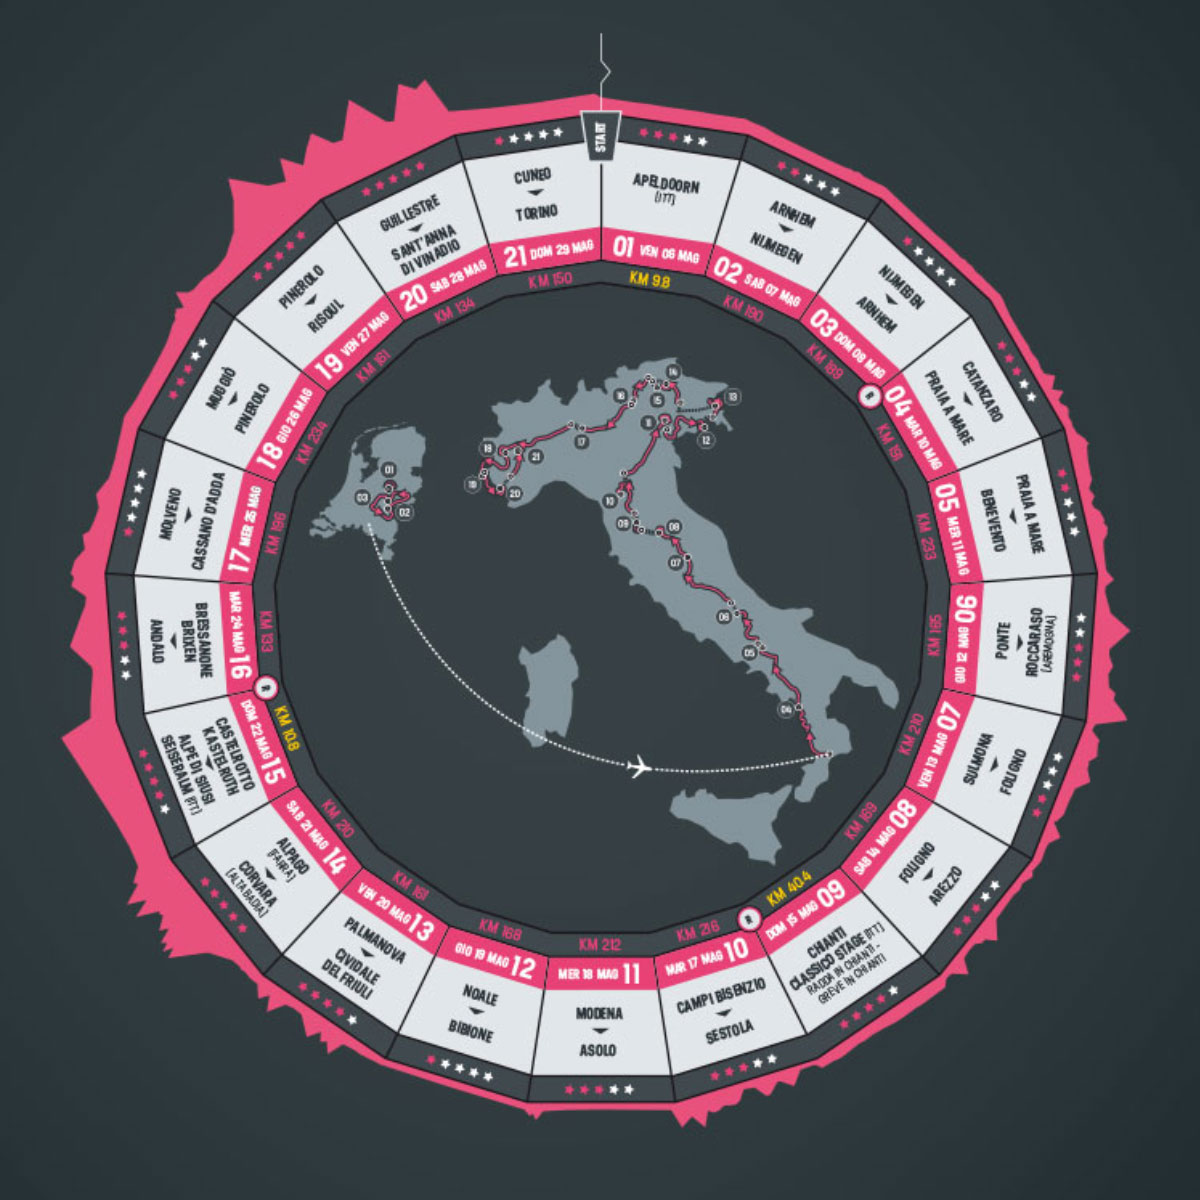 That wheel that the Giro tends to favour.